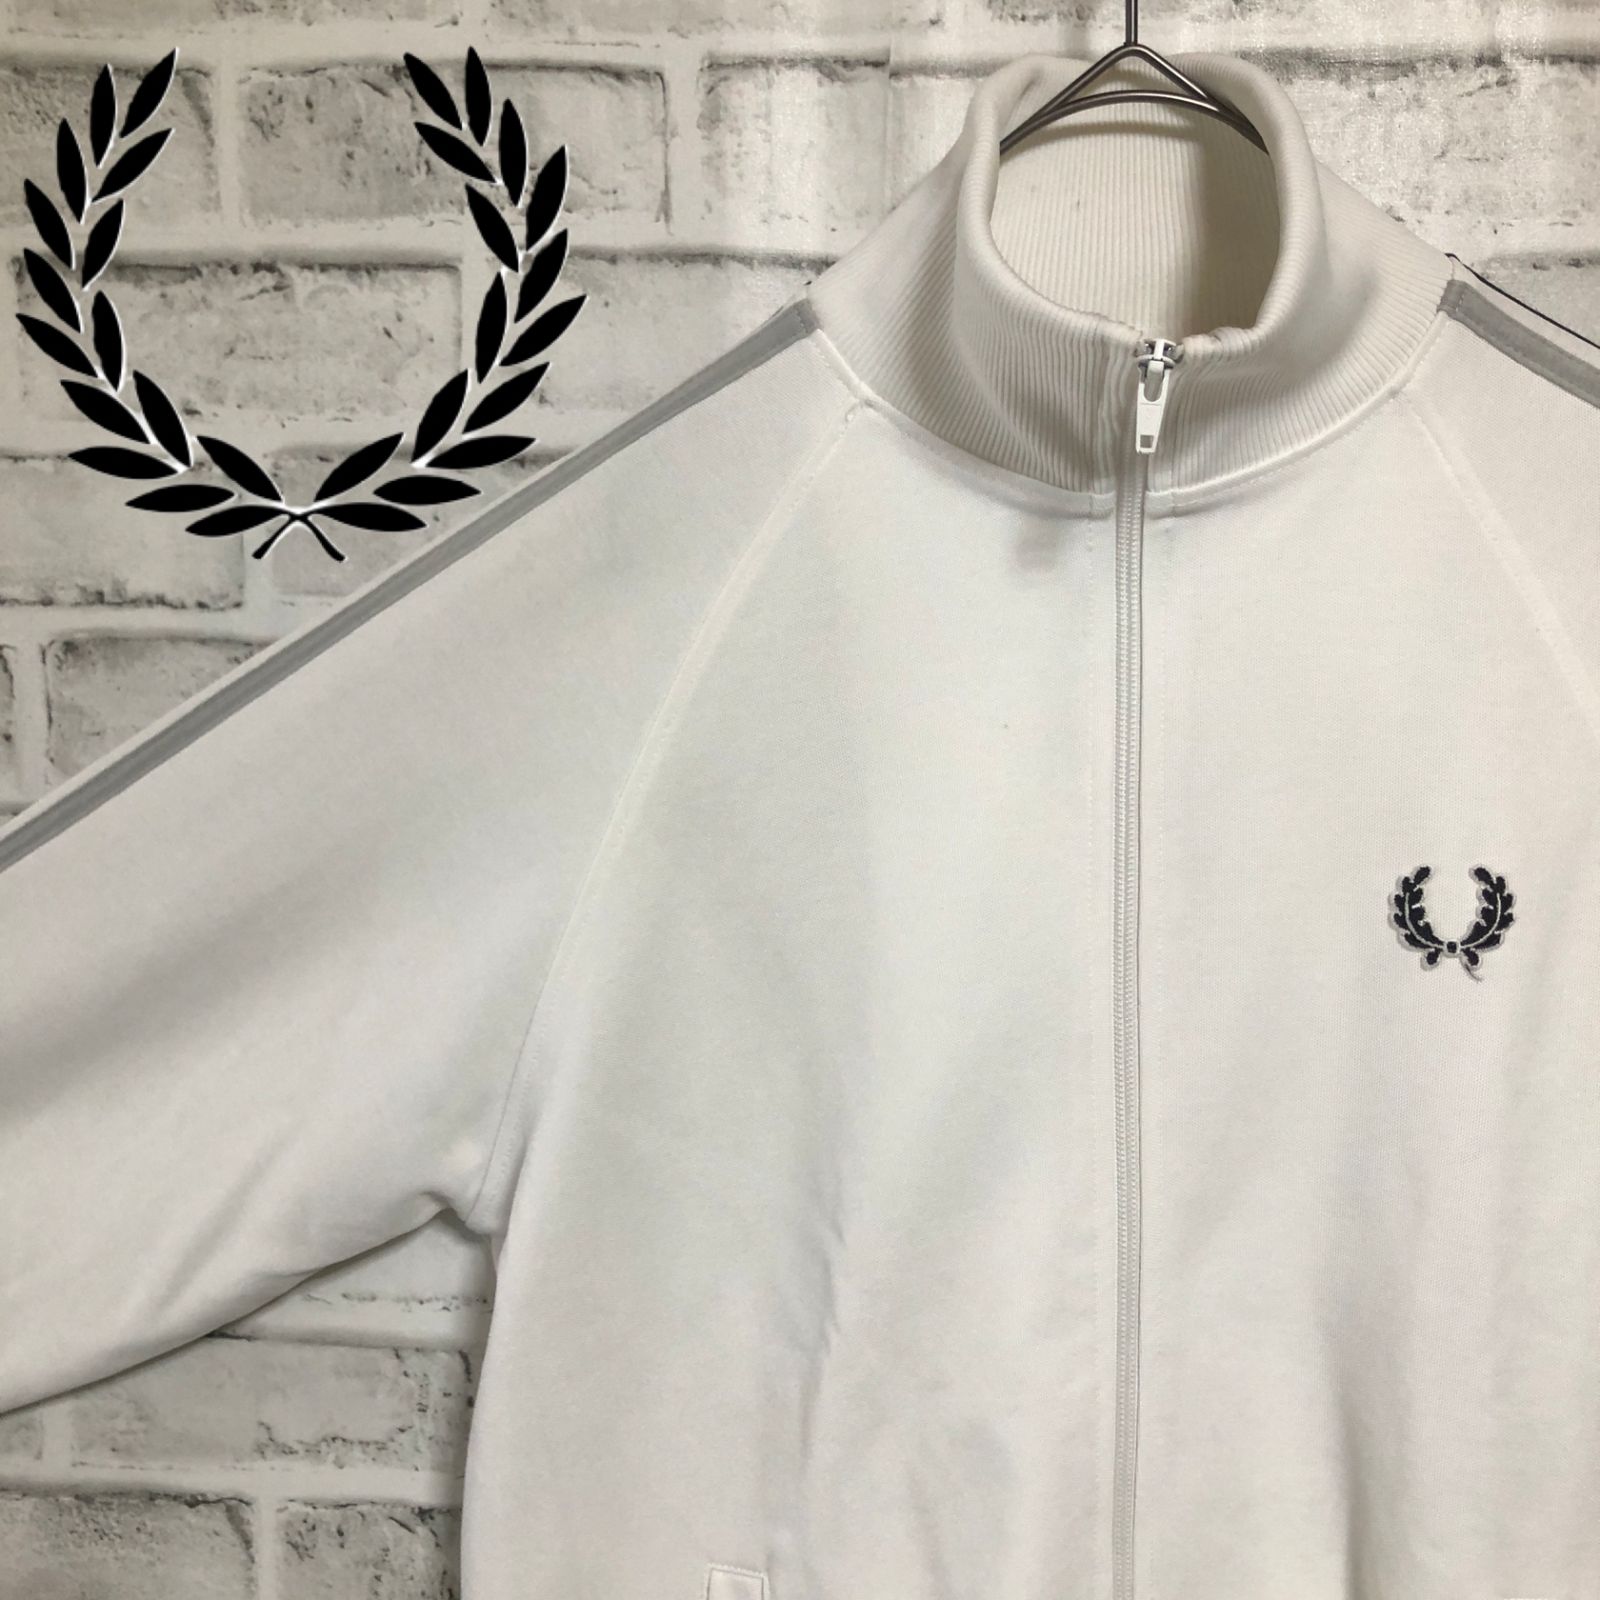 90s⭐️Fred Perry トラックジャケット vintage トレファイル